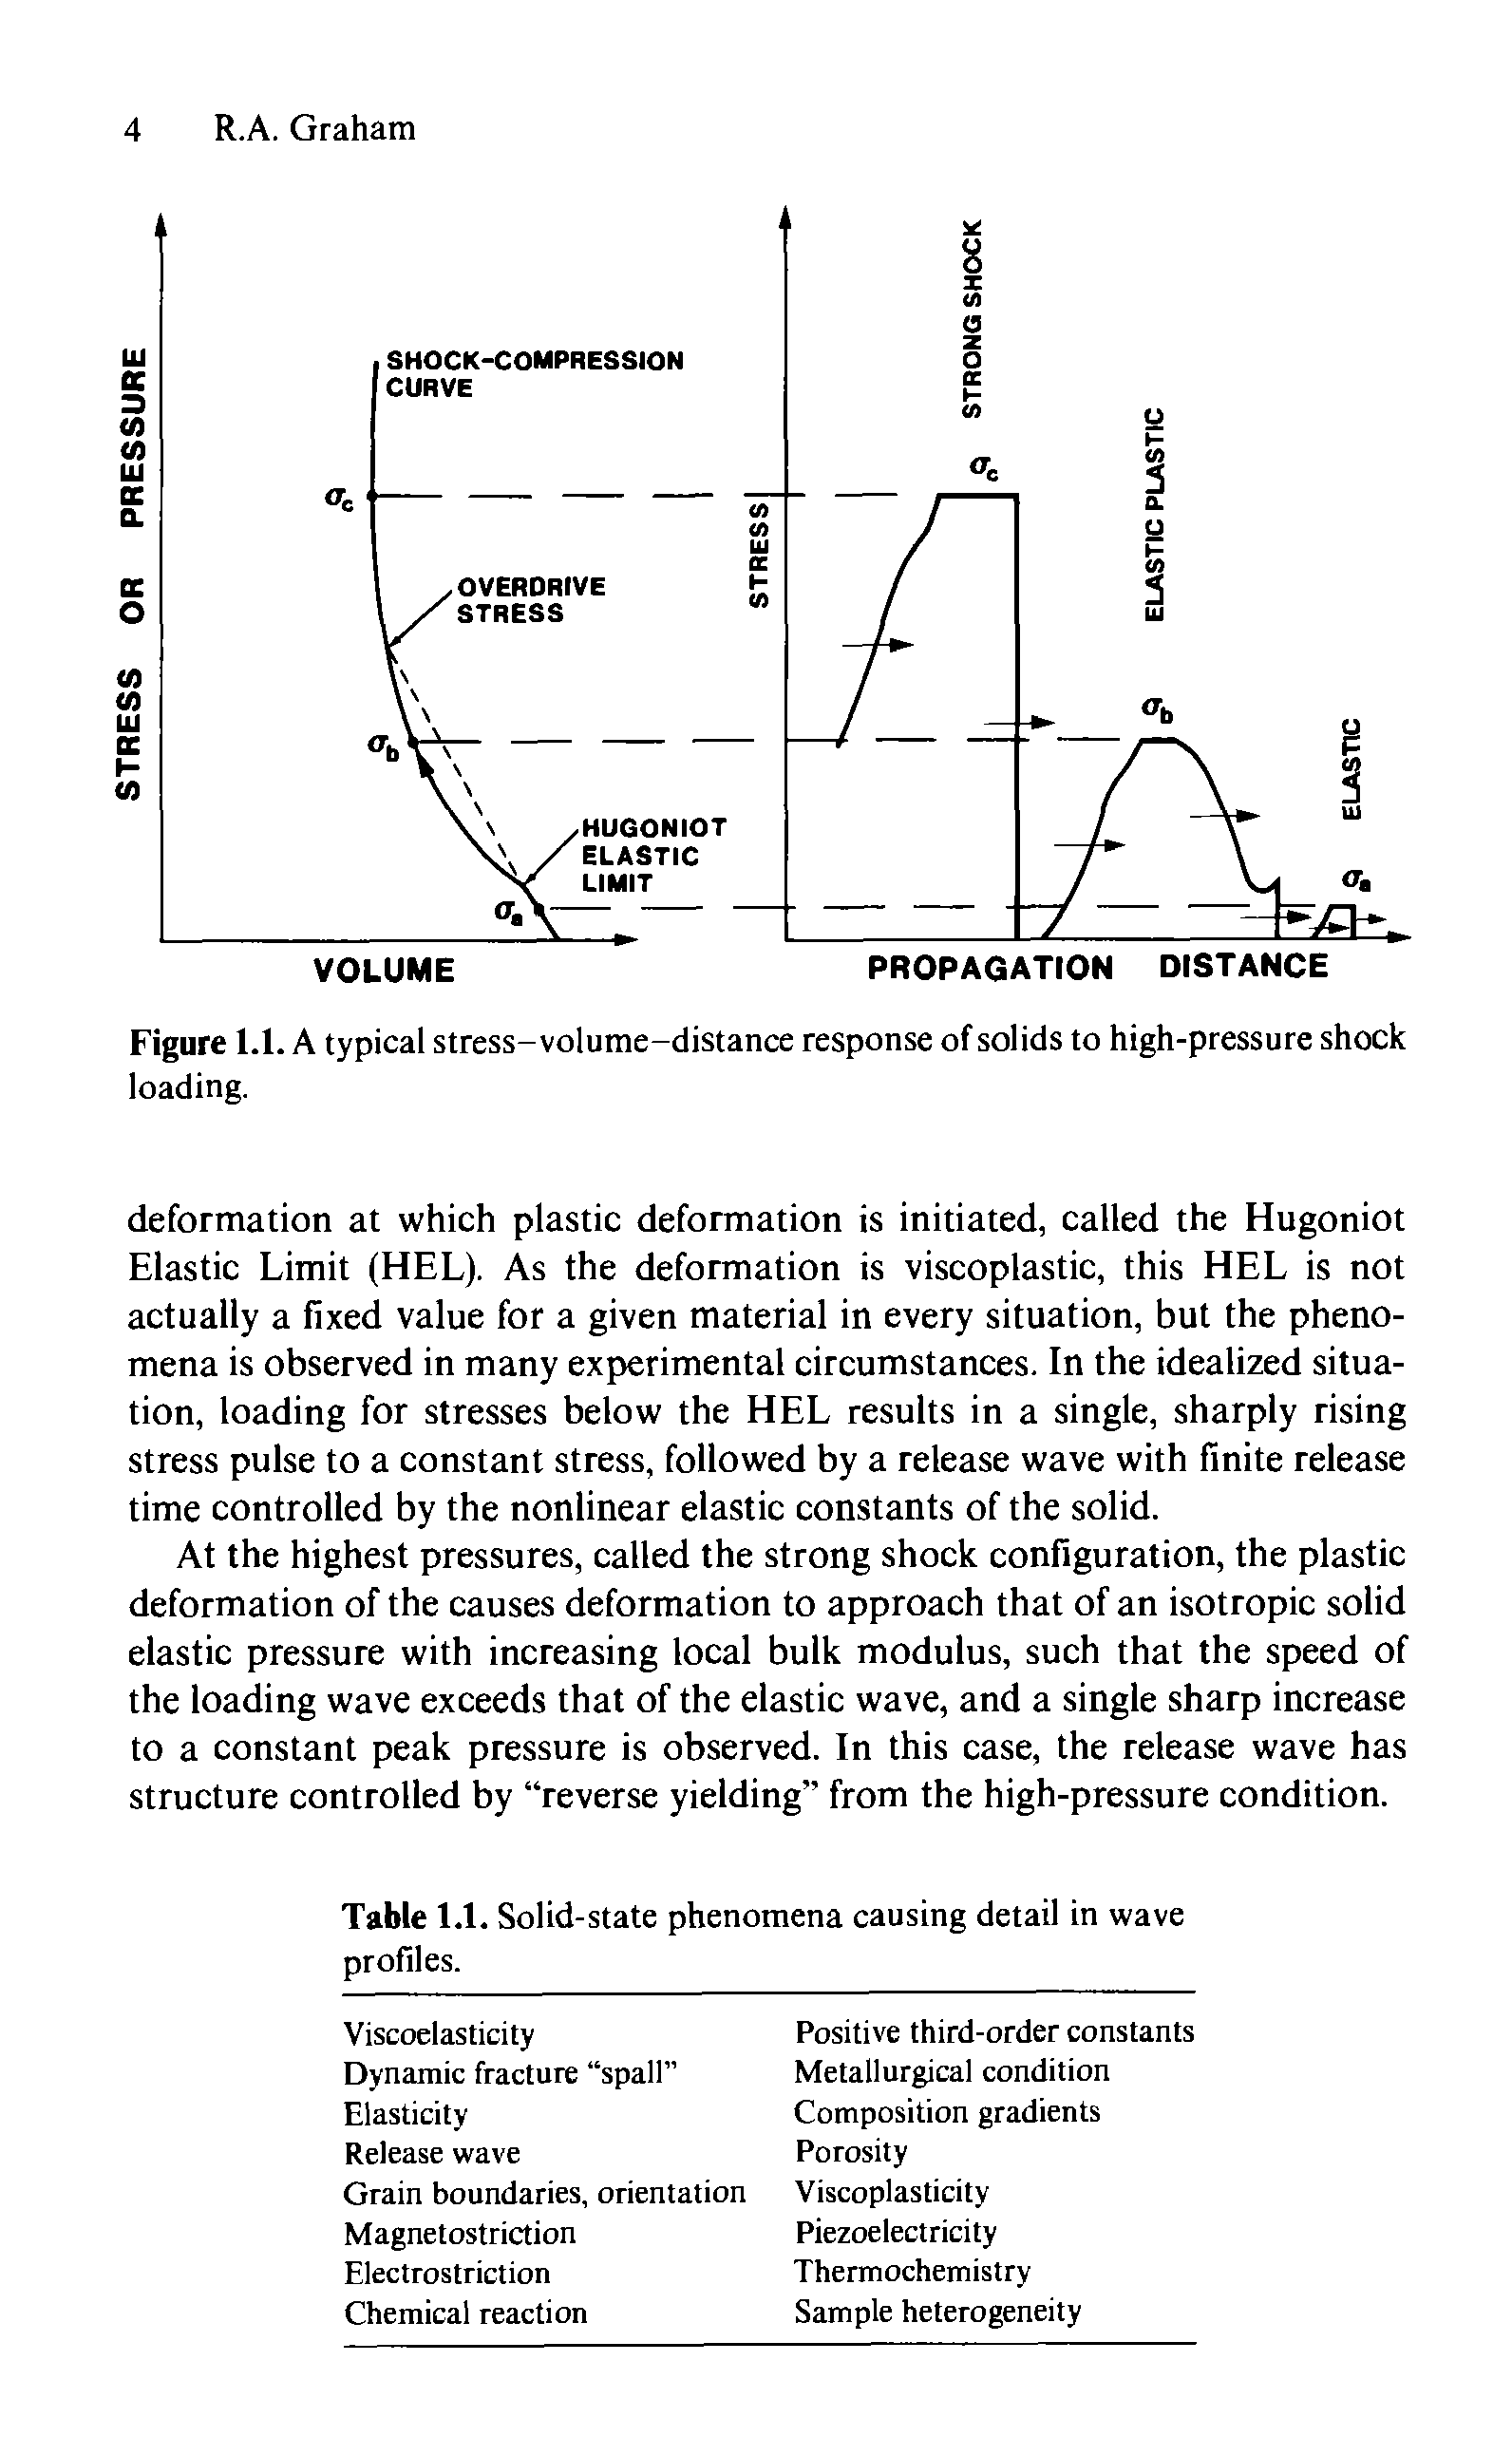 Figure 1.1. A typical stress-volume-distance response of solids to high-pressure shock loading.